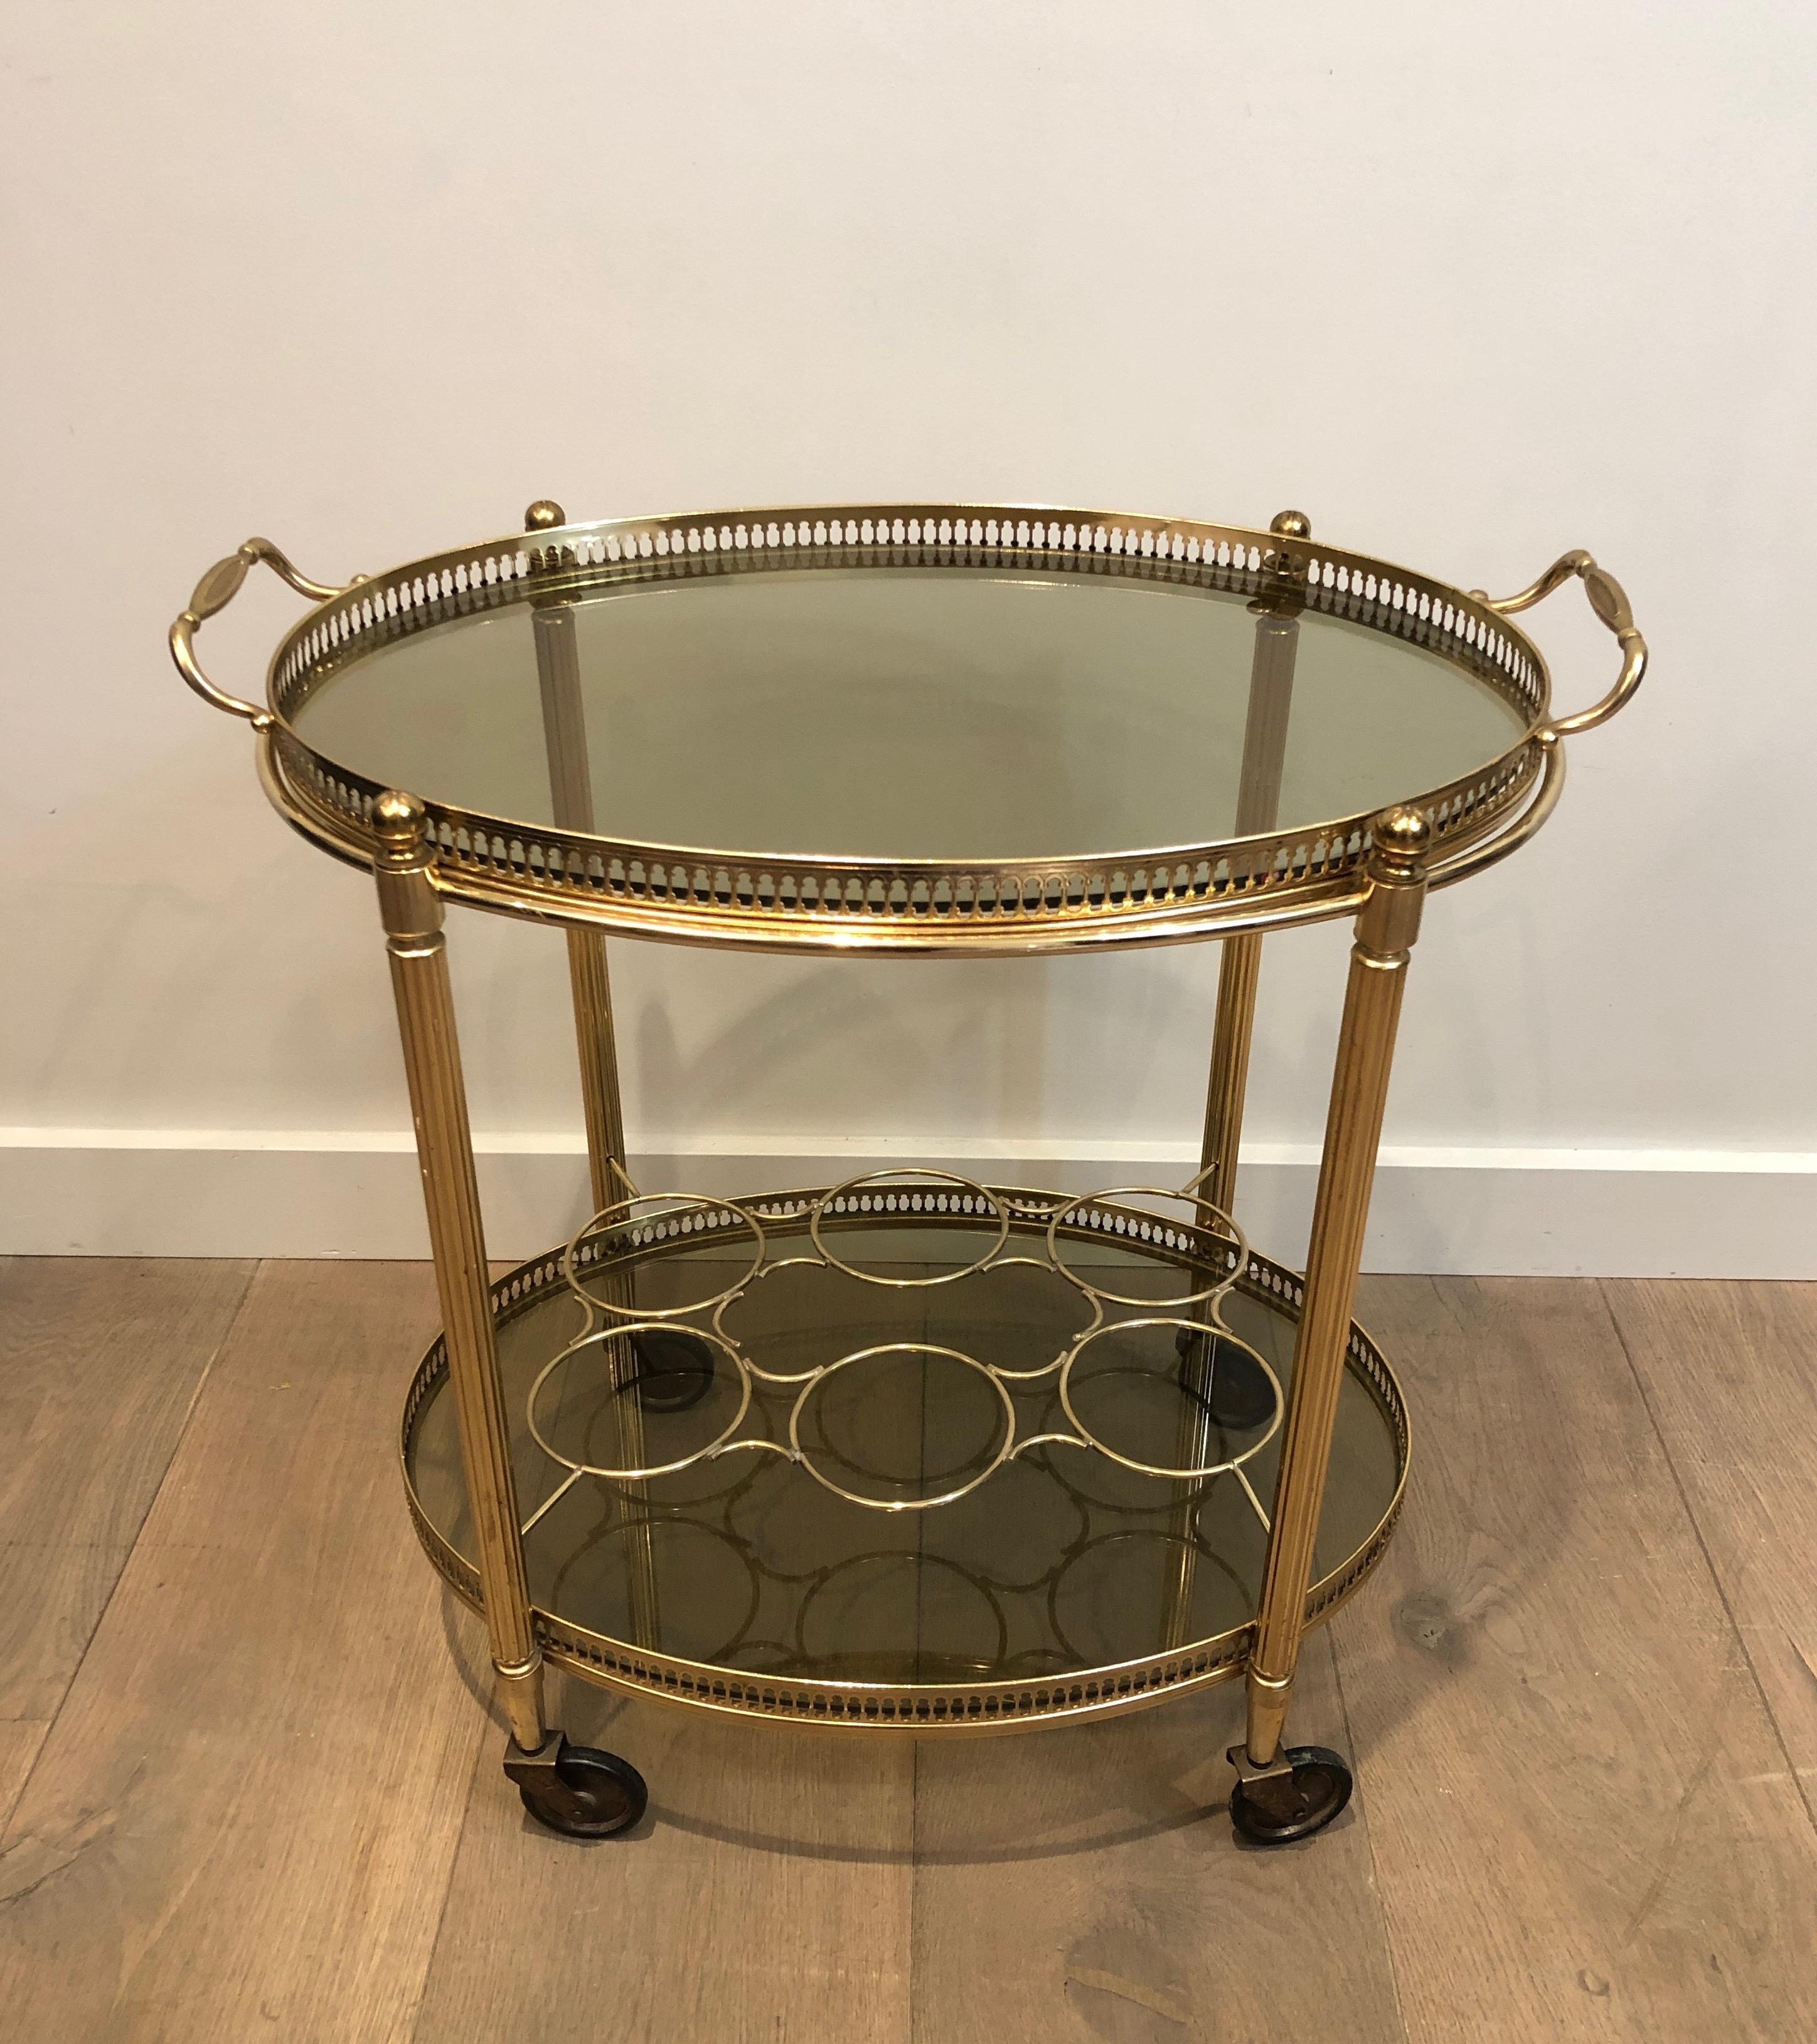 This oval drinks trolley is made of gilt metal with removable trays and bottles holder. This is a French work, circa 1940.